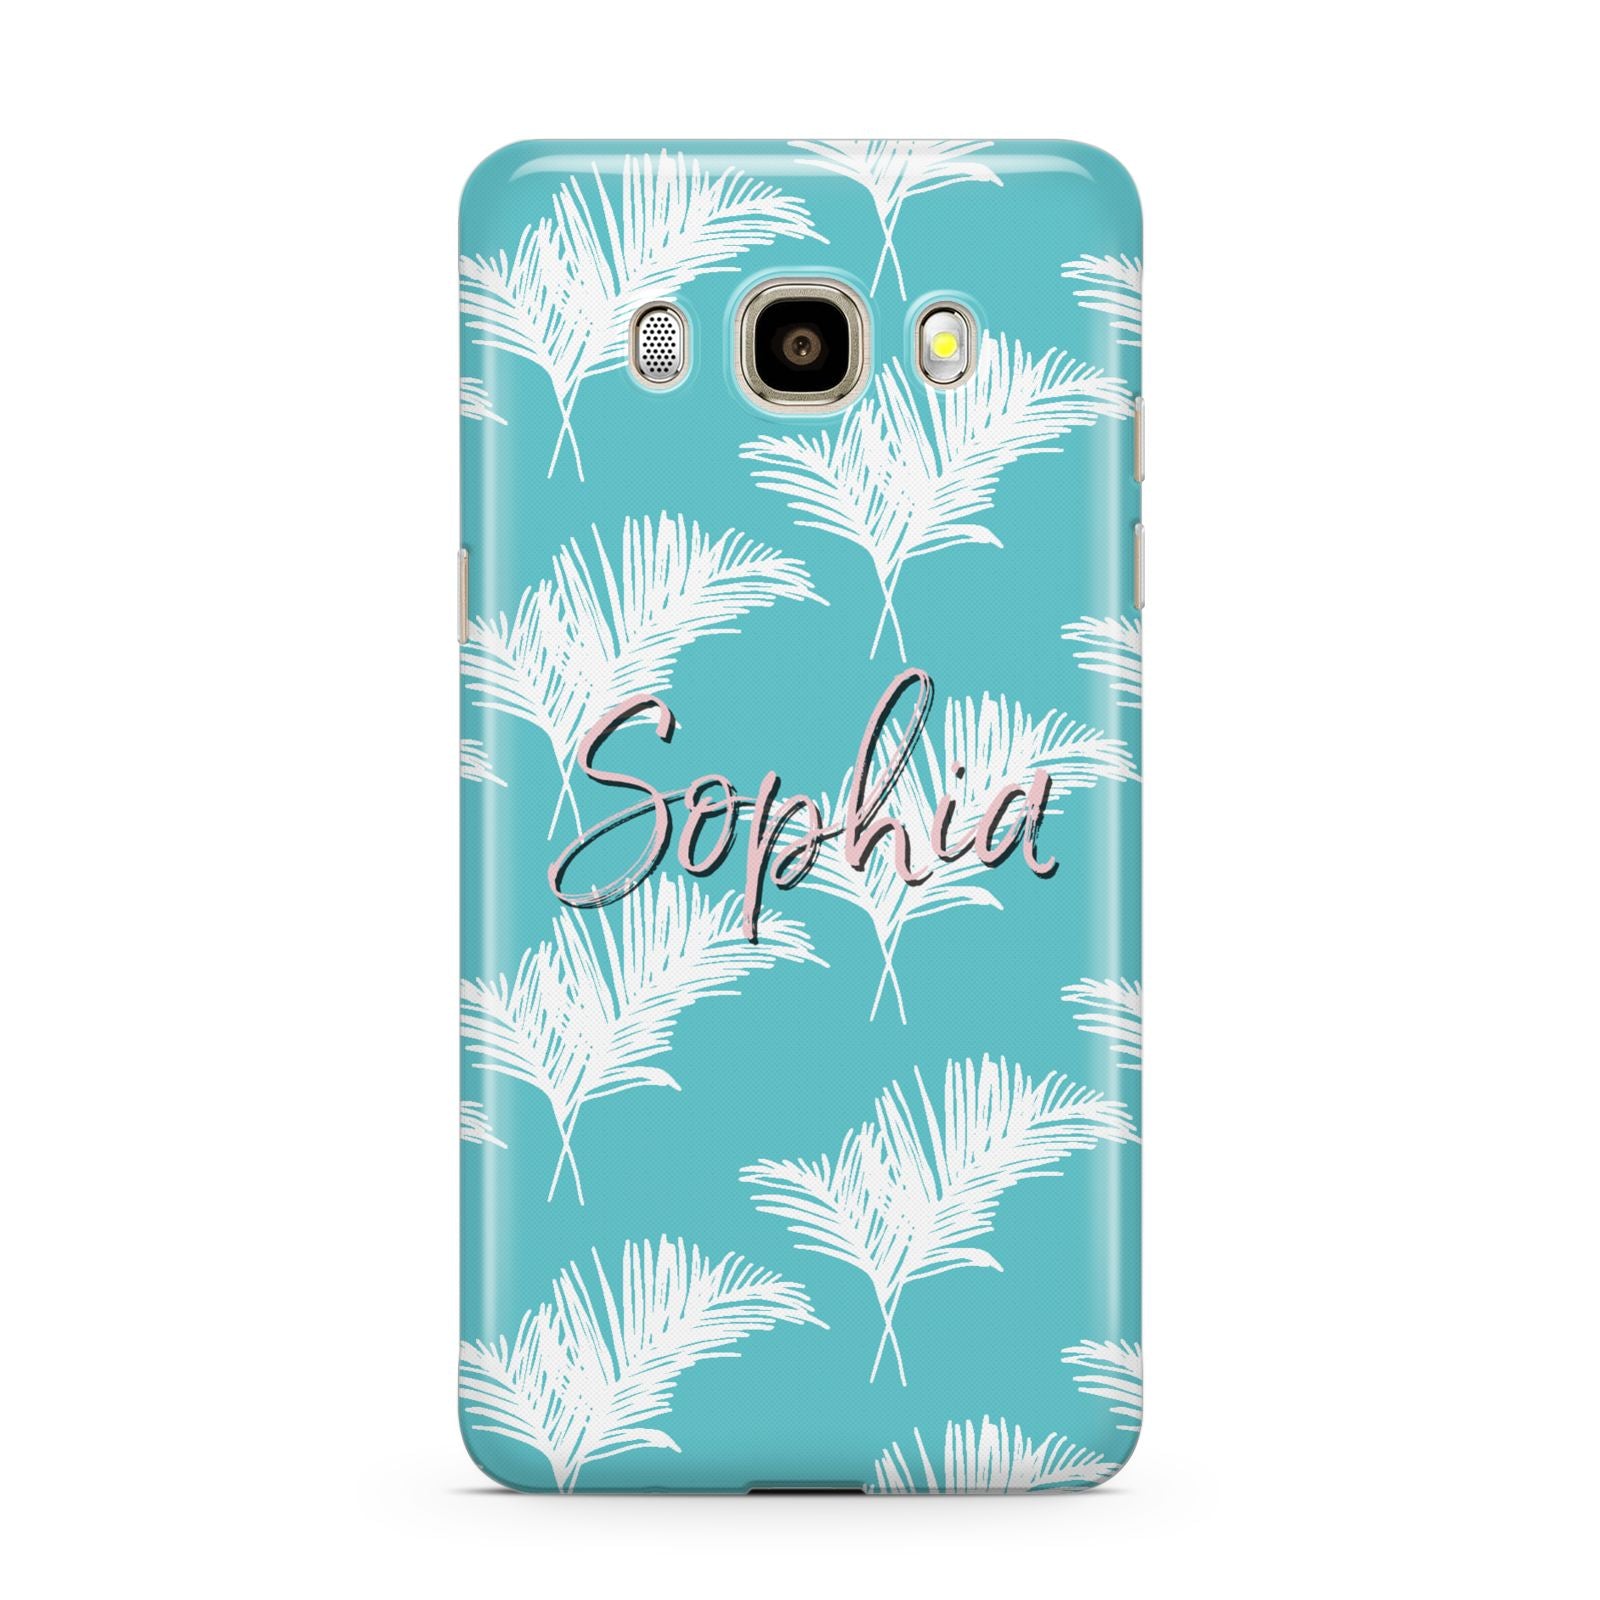 Personalised Blue White Tropical Foliage Samsung Galaxy J7 2016 Case on gold phone